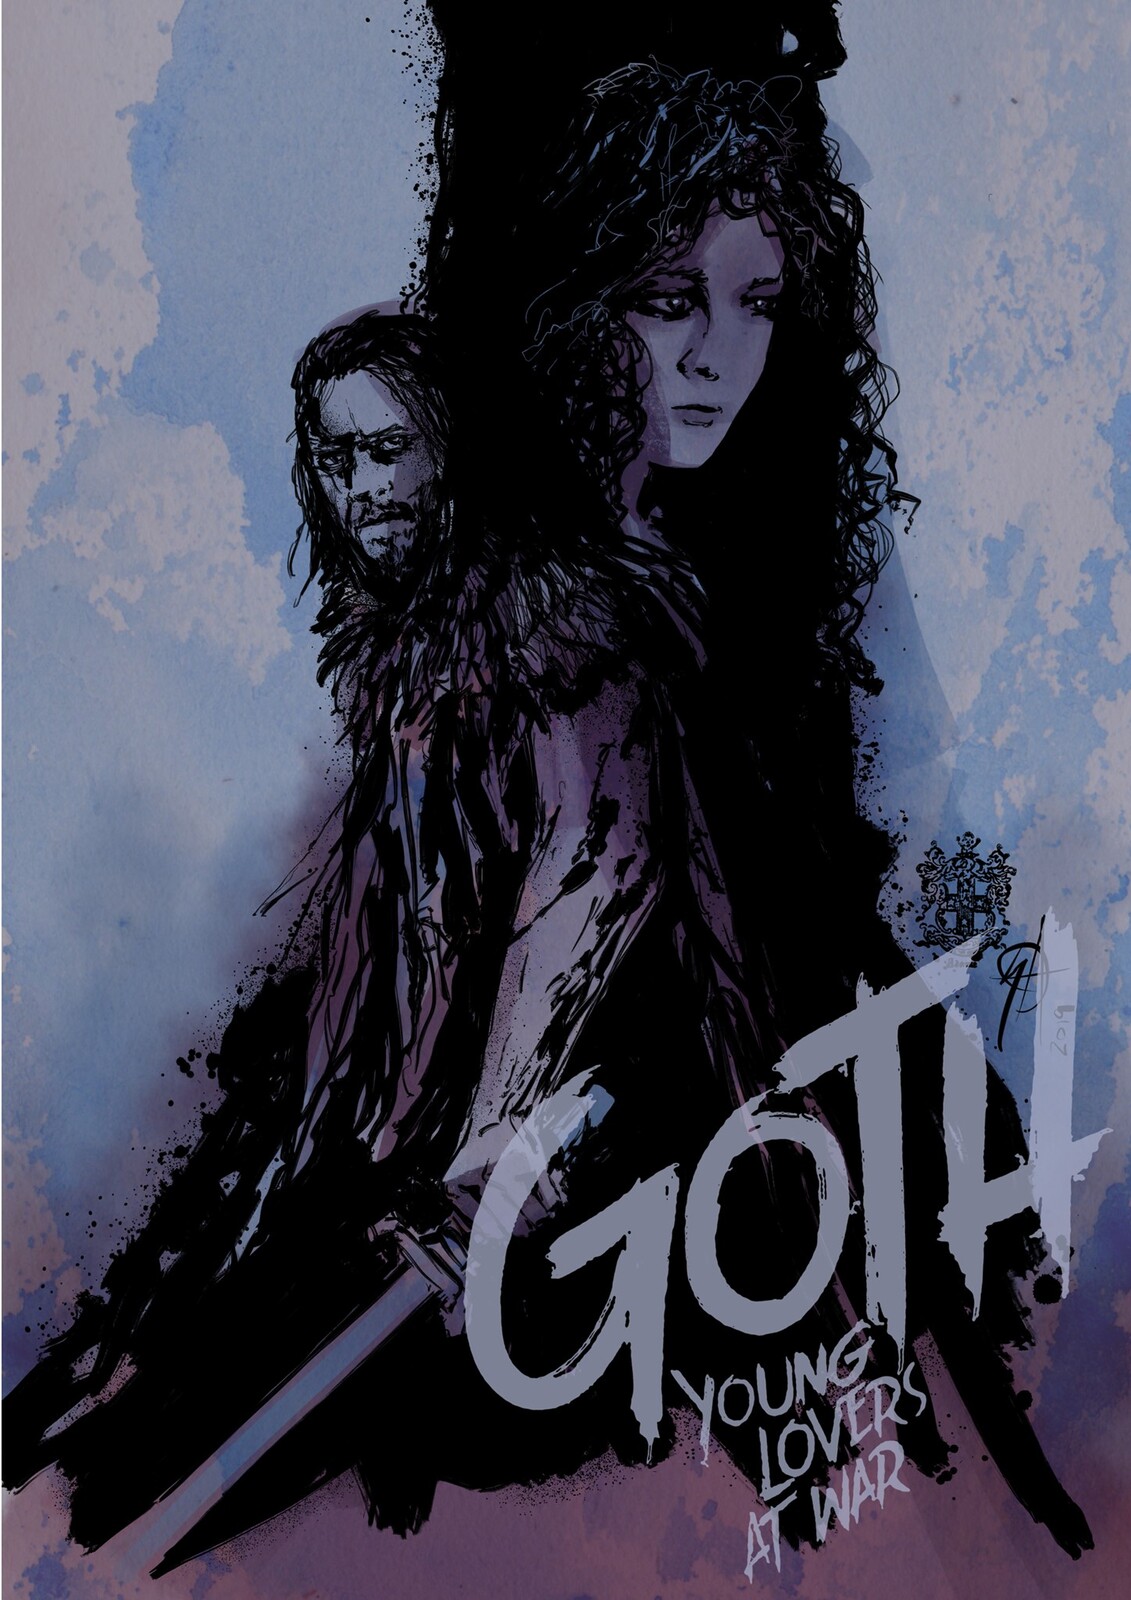 Goth- Lovers at War Cover